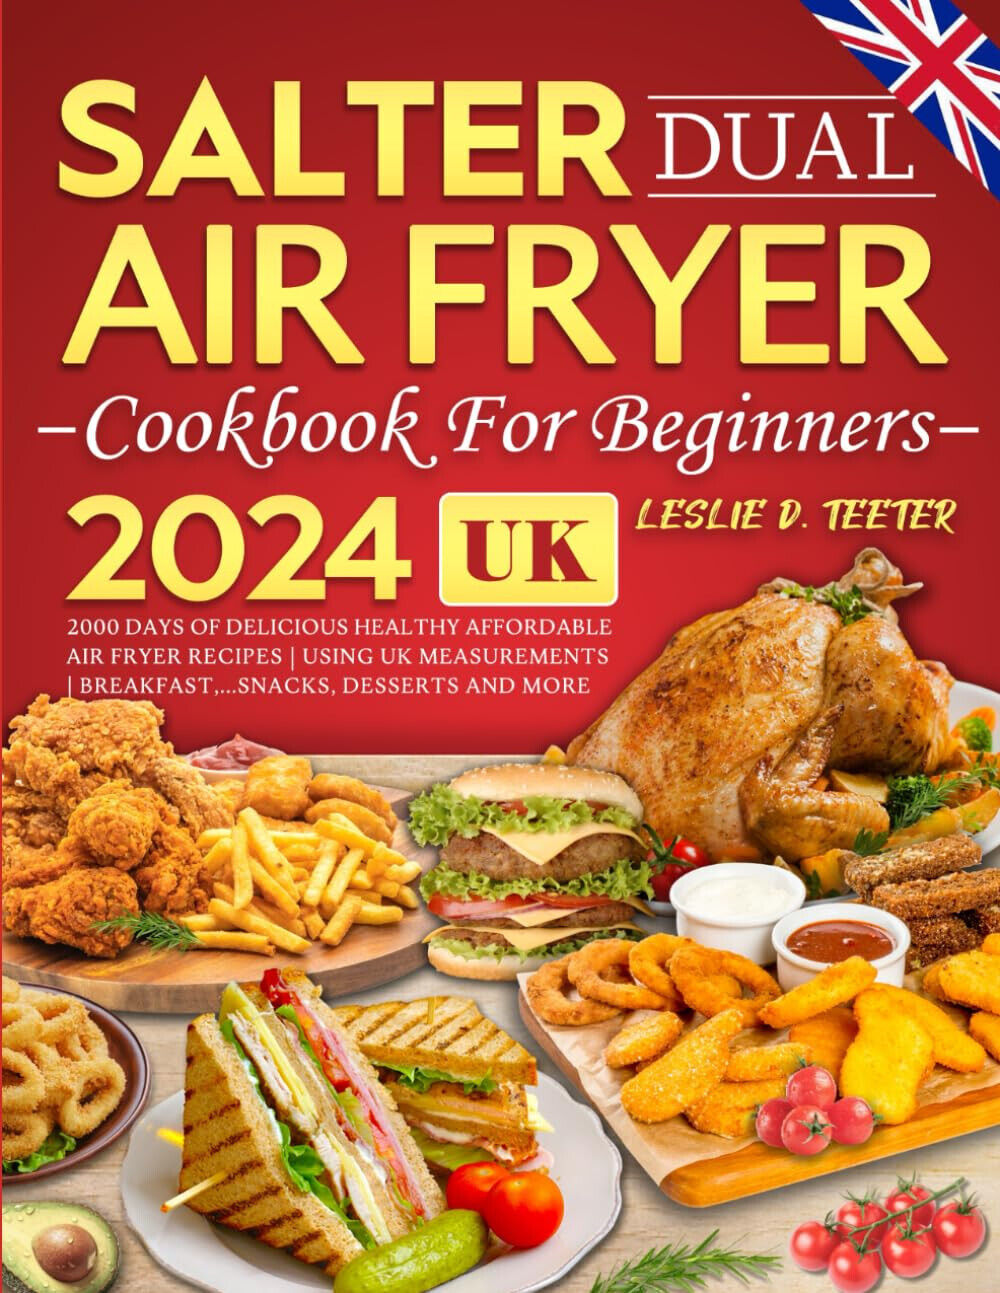 Salter Dual Air Fryer Cookbook for Beginners 2024: 2000 Days Easy Recipes UK